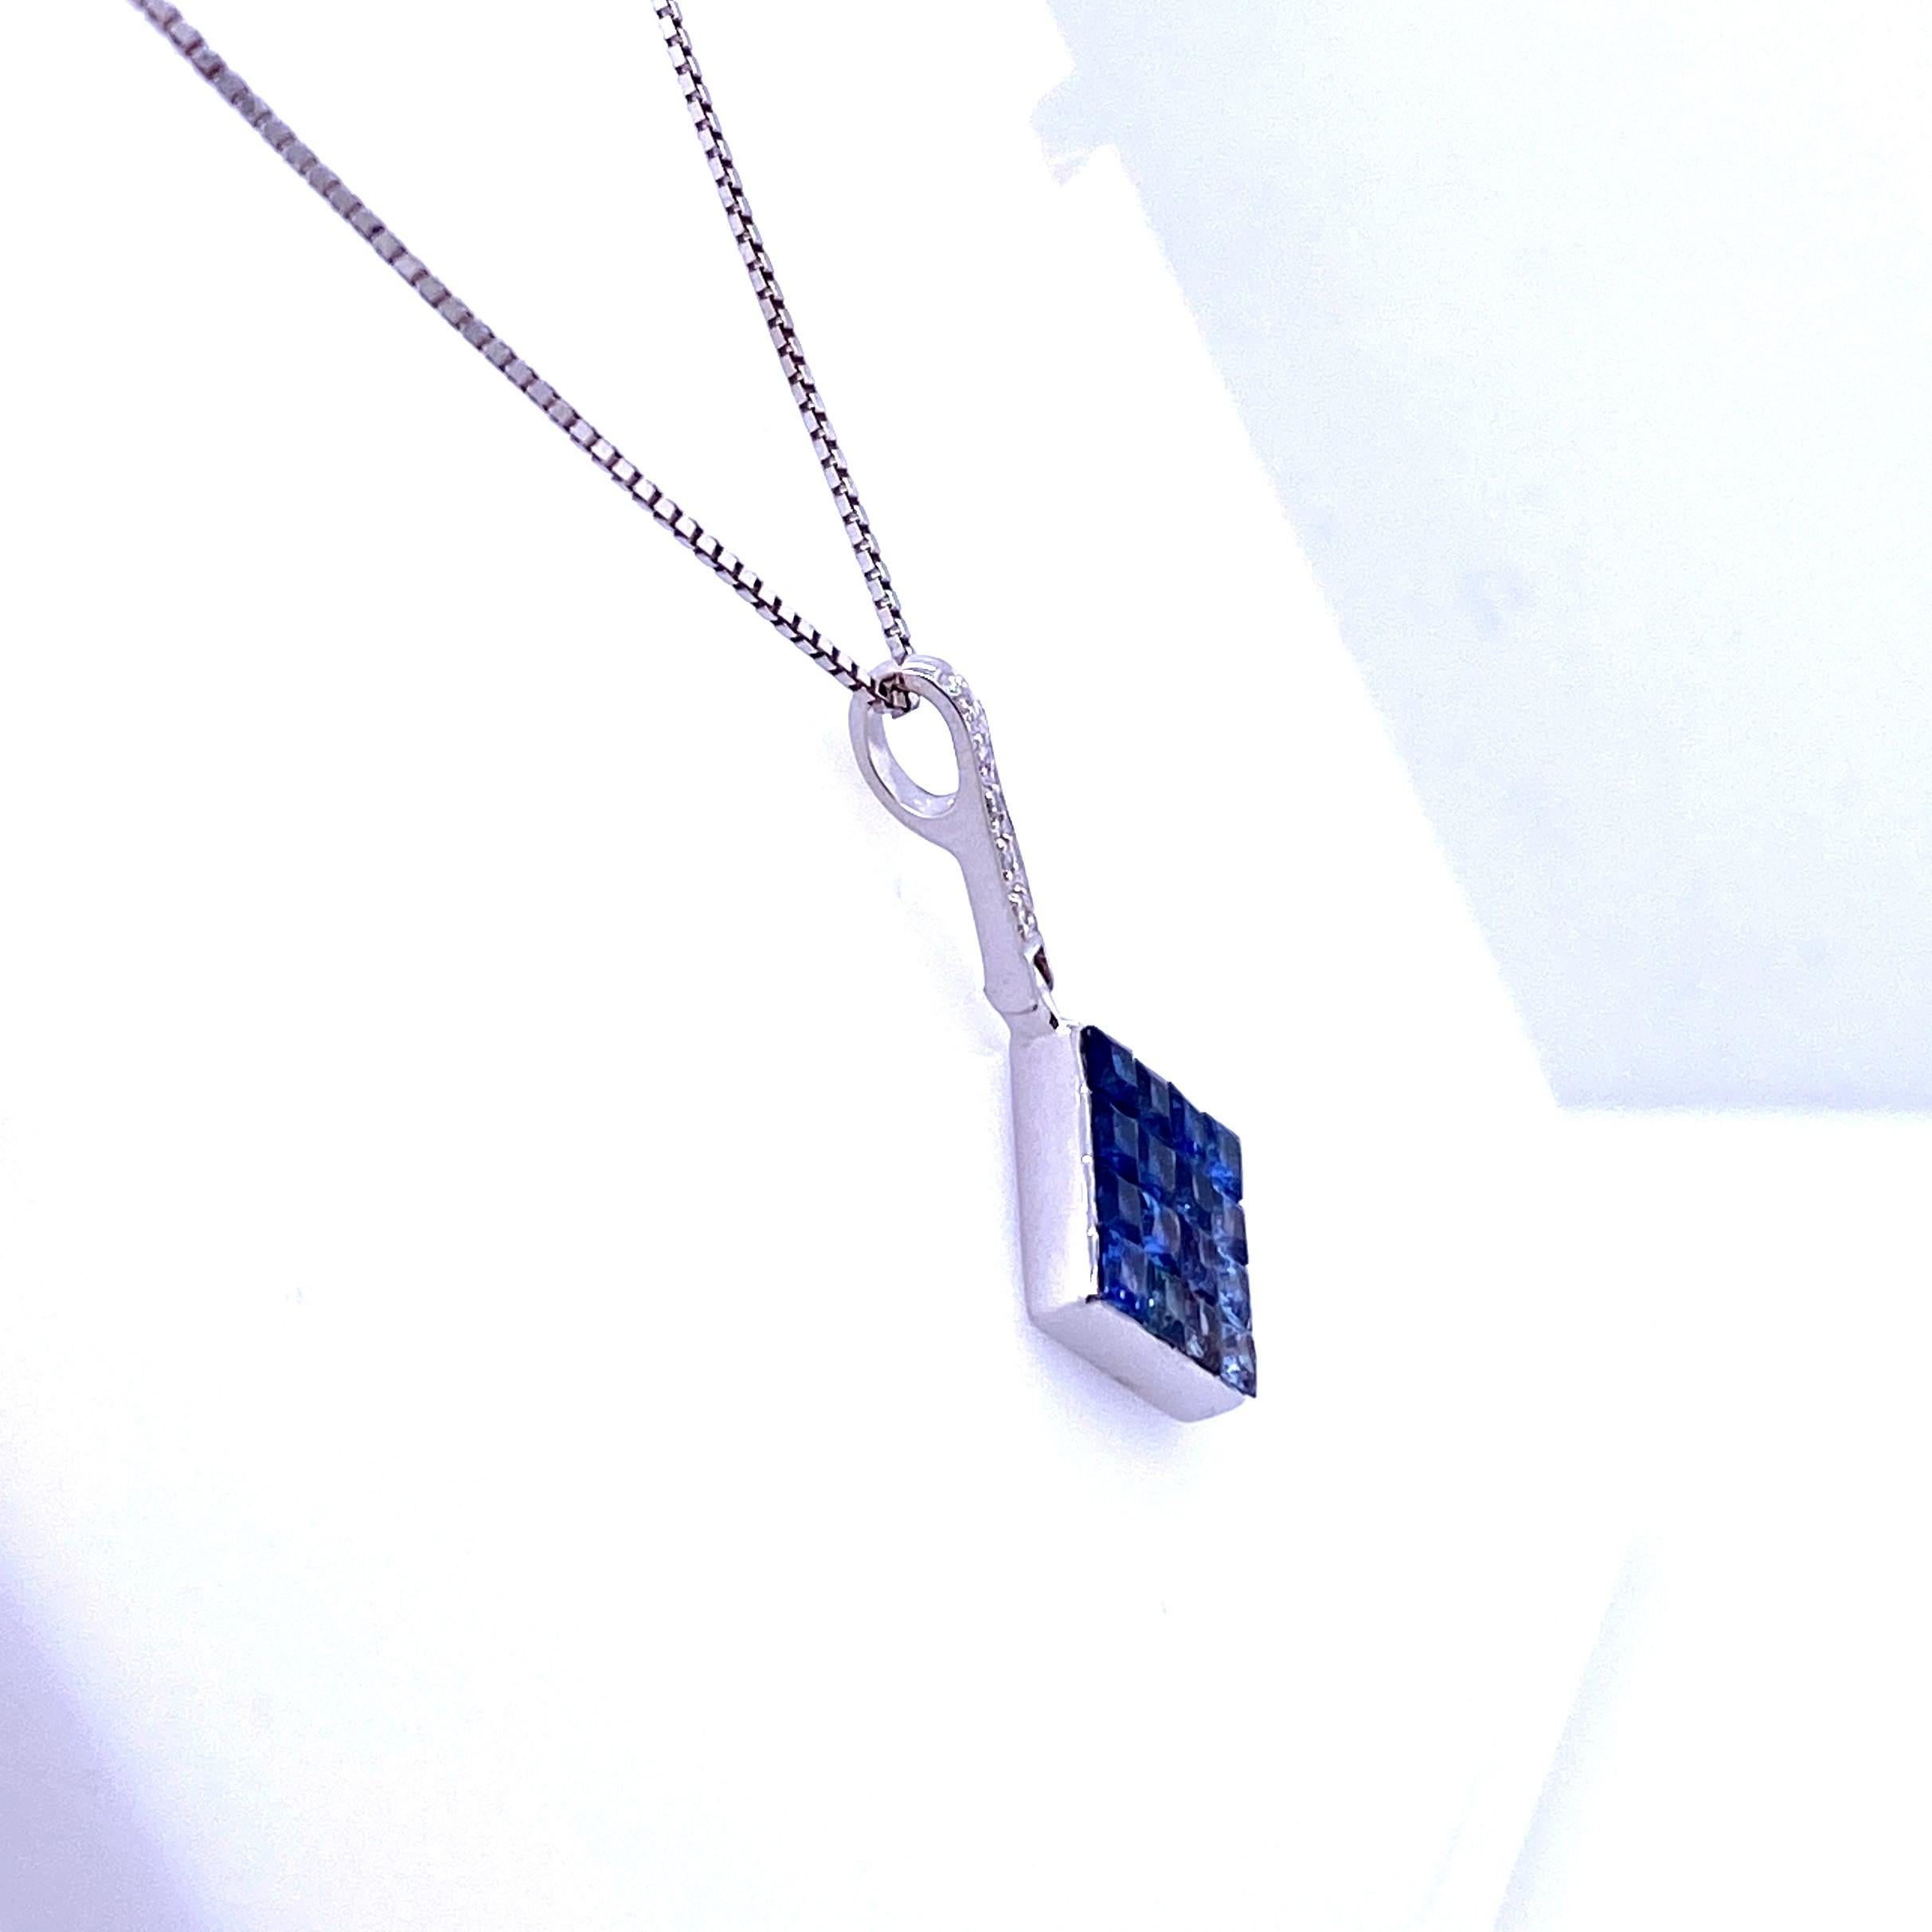 One 14 karat white gold (stamped 14K AV) square shaped pendant measuring 15mm x 15mm with a bail measuring 0.5